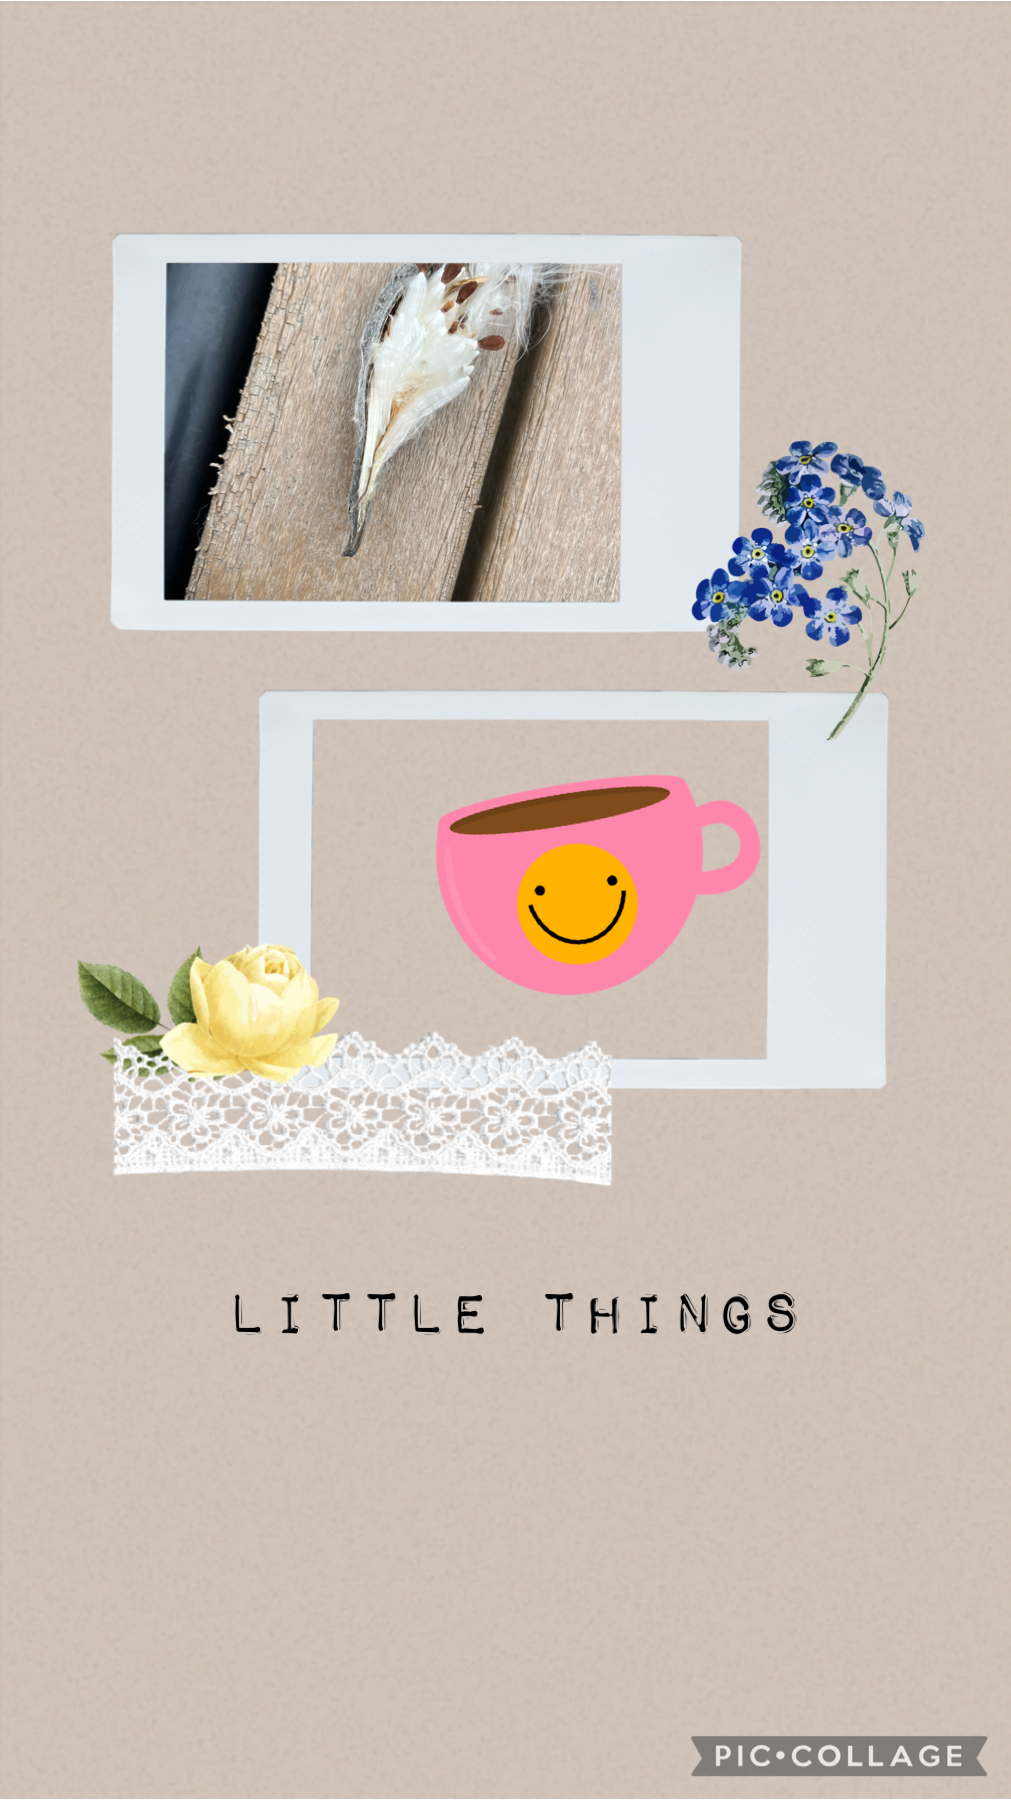 #little things 